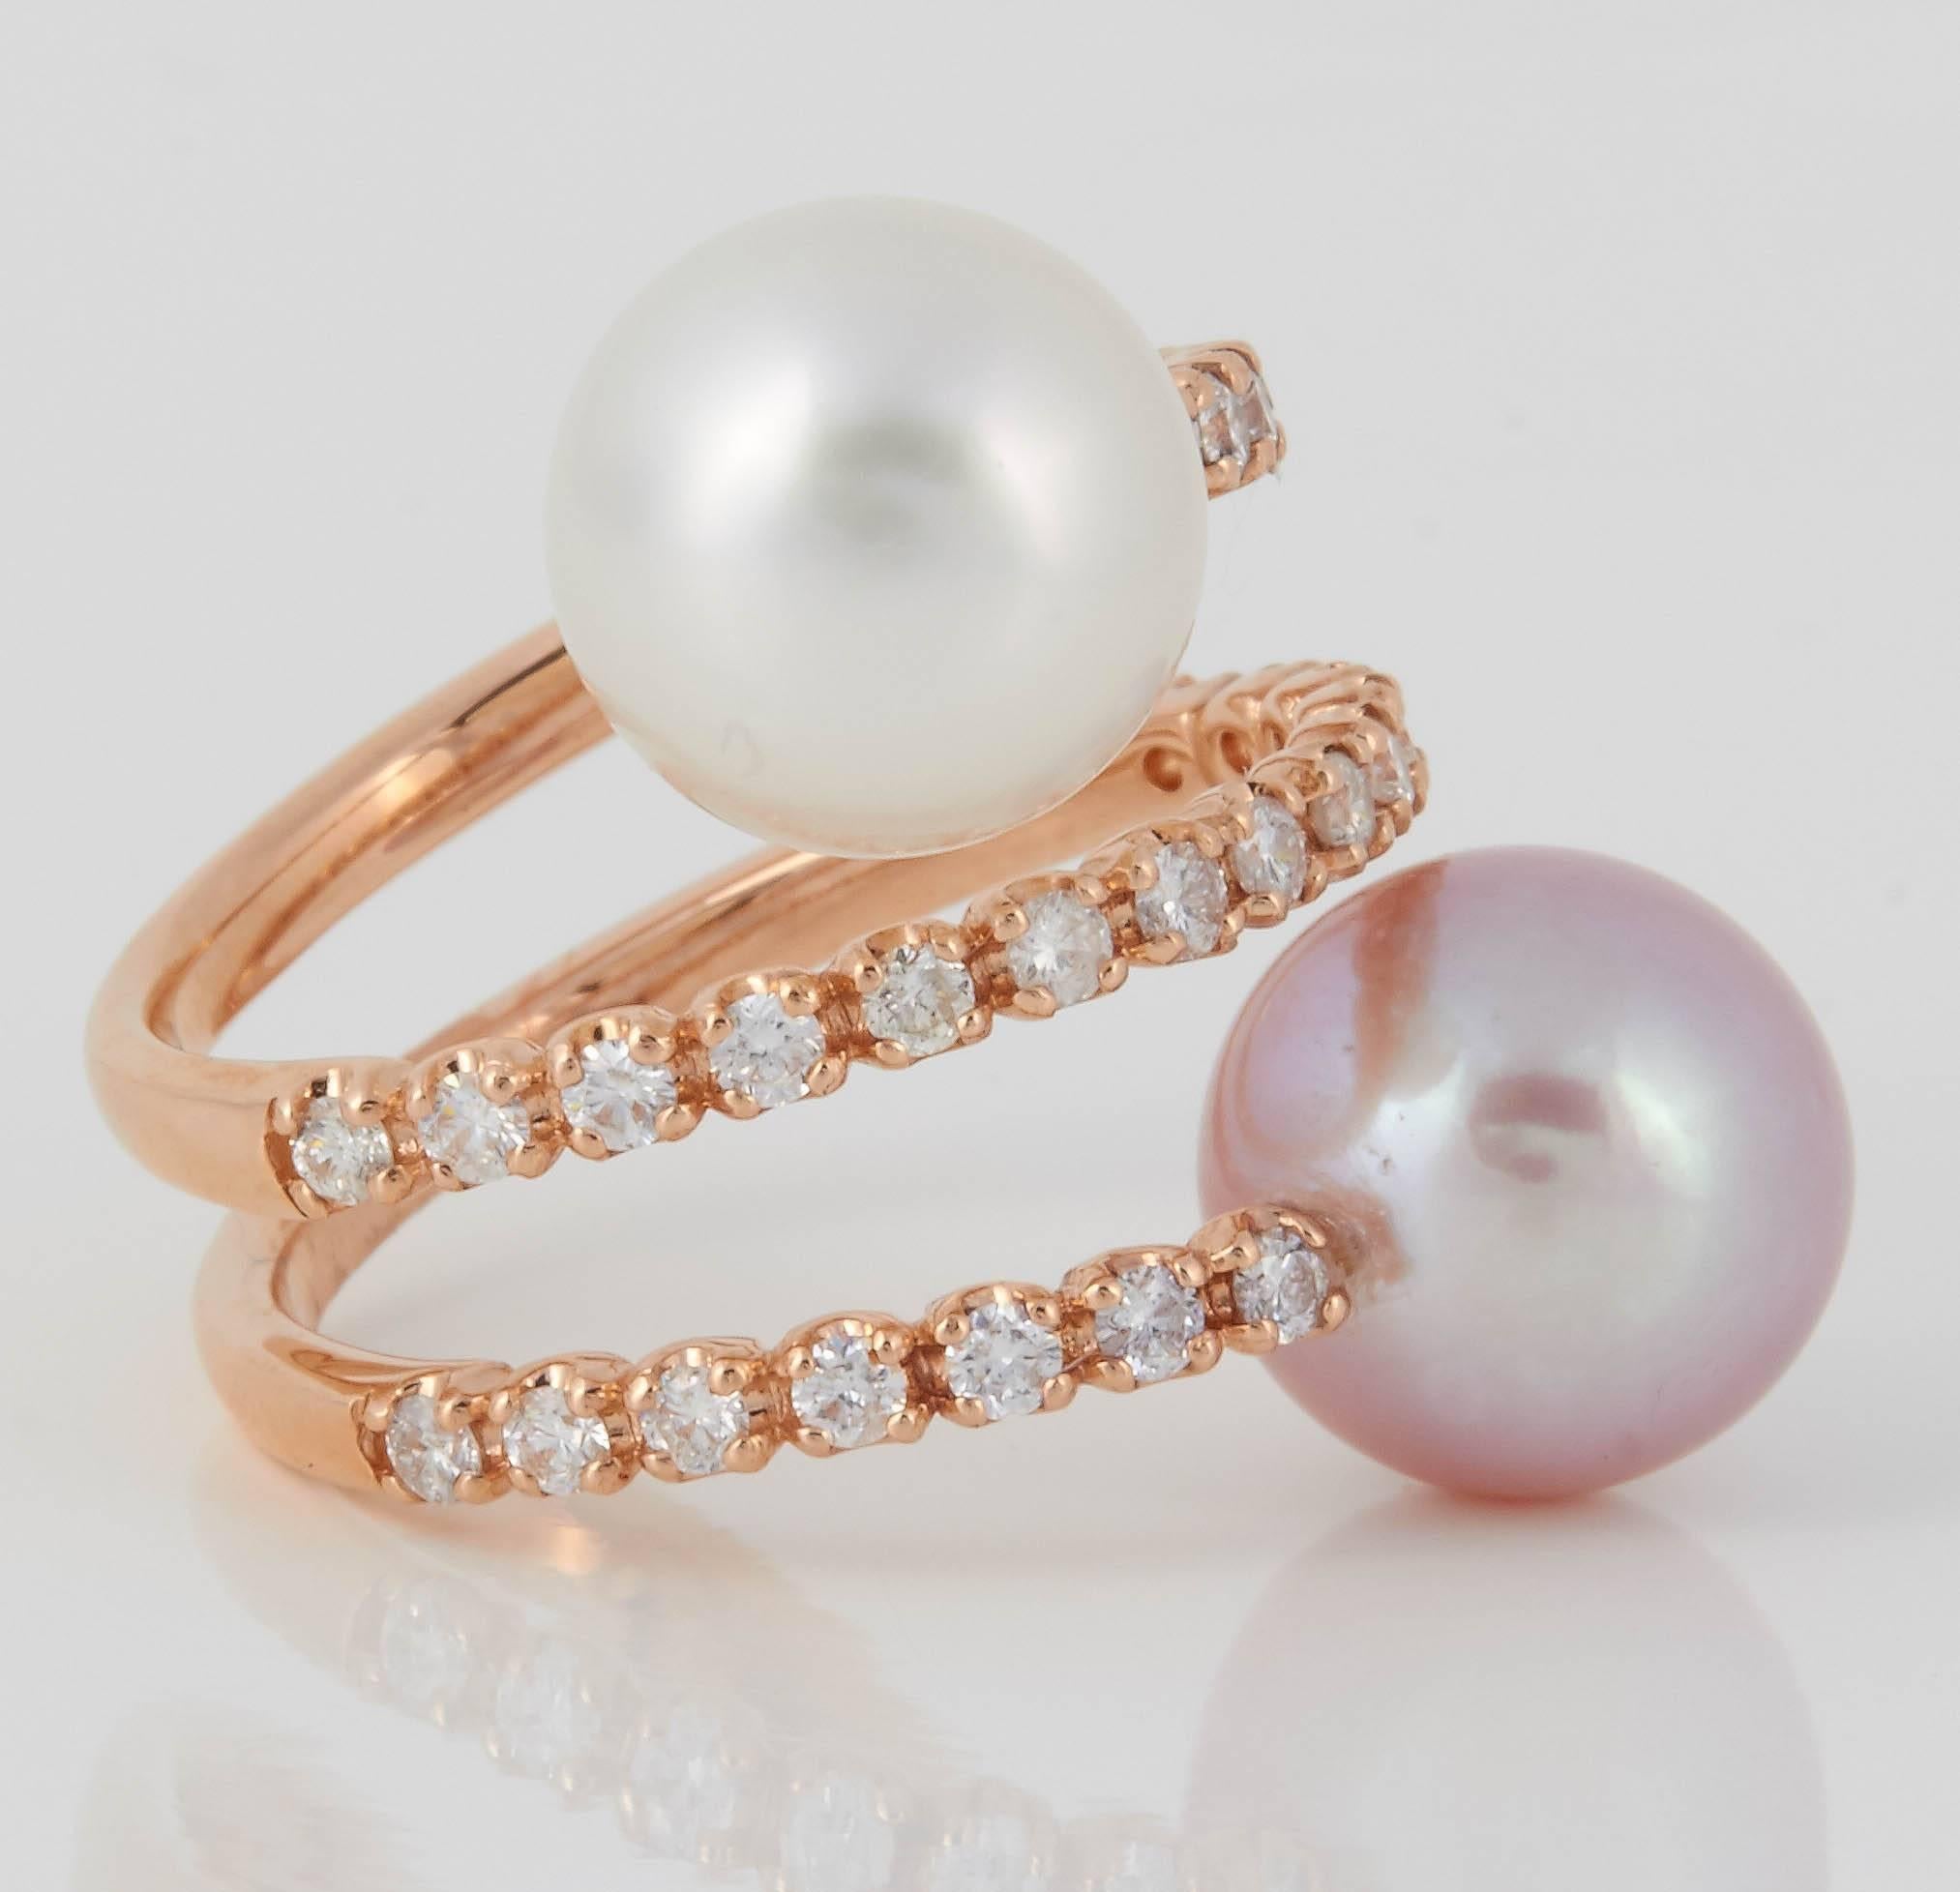 18K Rose Gold Ring
South Sea Pearl and Fresh Water Pearl 9-10mm
28 Diamonds: 0.60 cts.
4.5 g. Gold